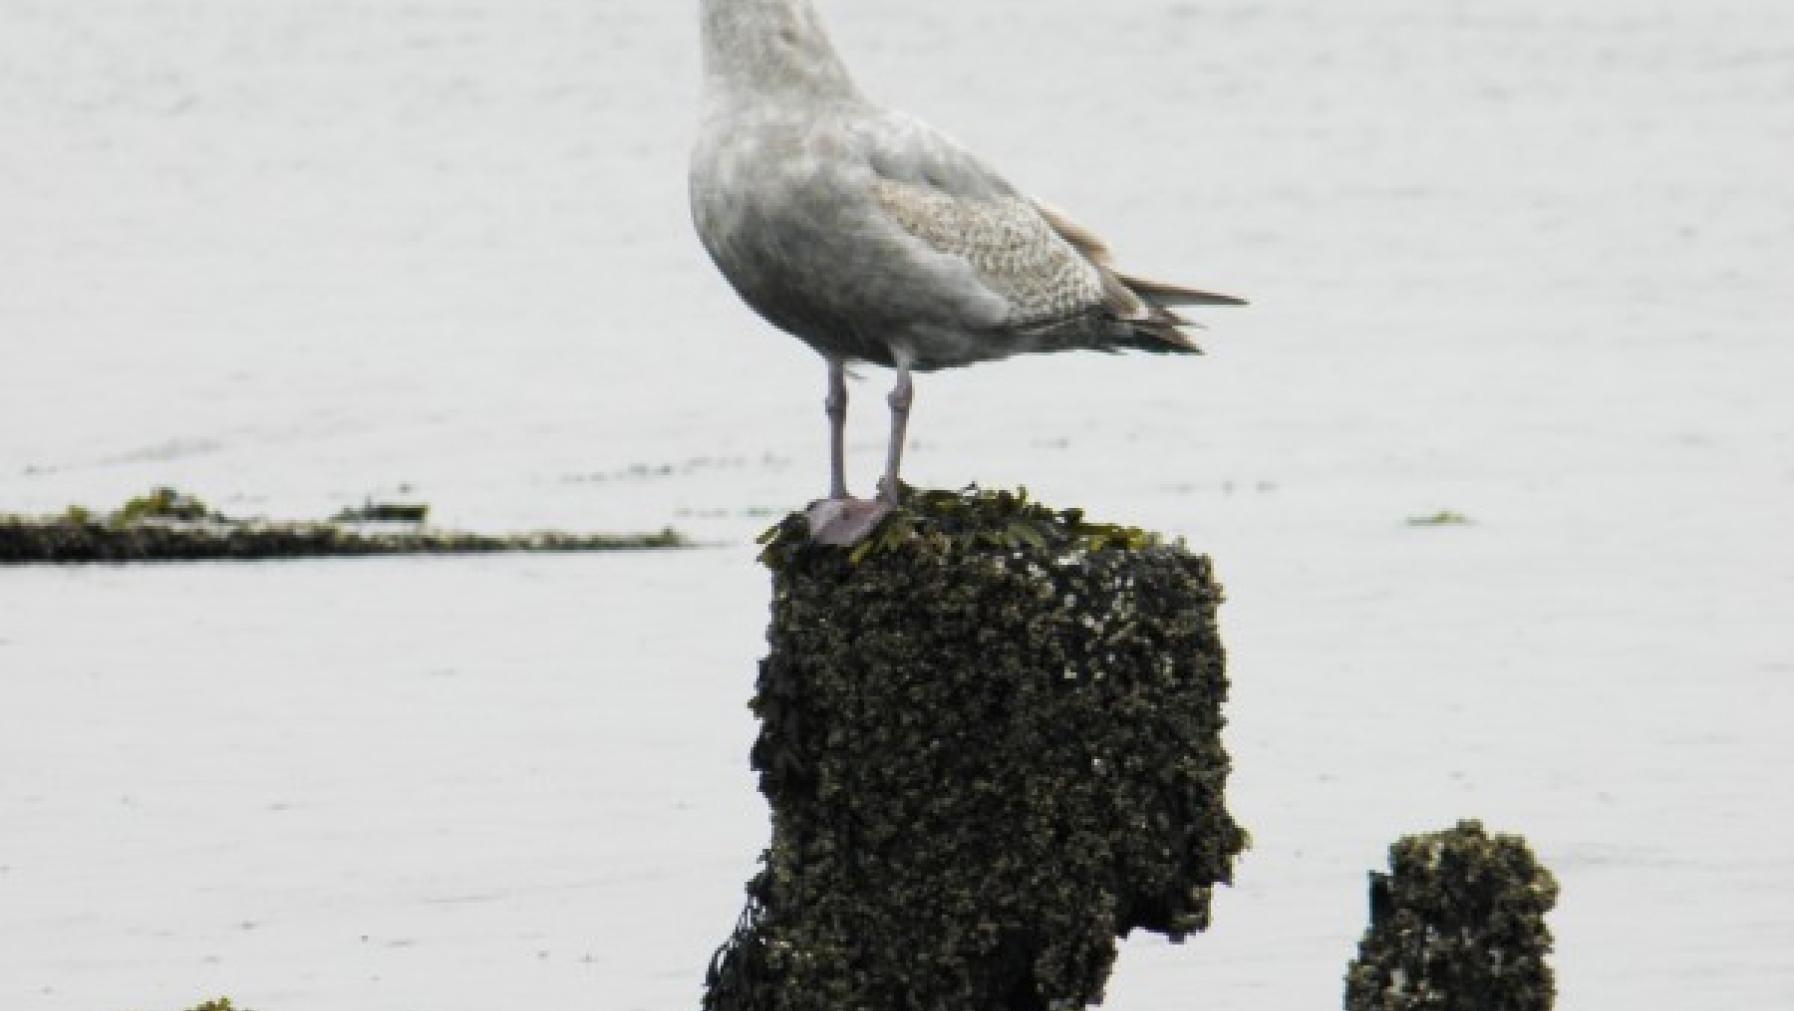 A seagull standing on an object above water.